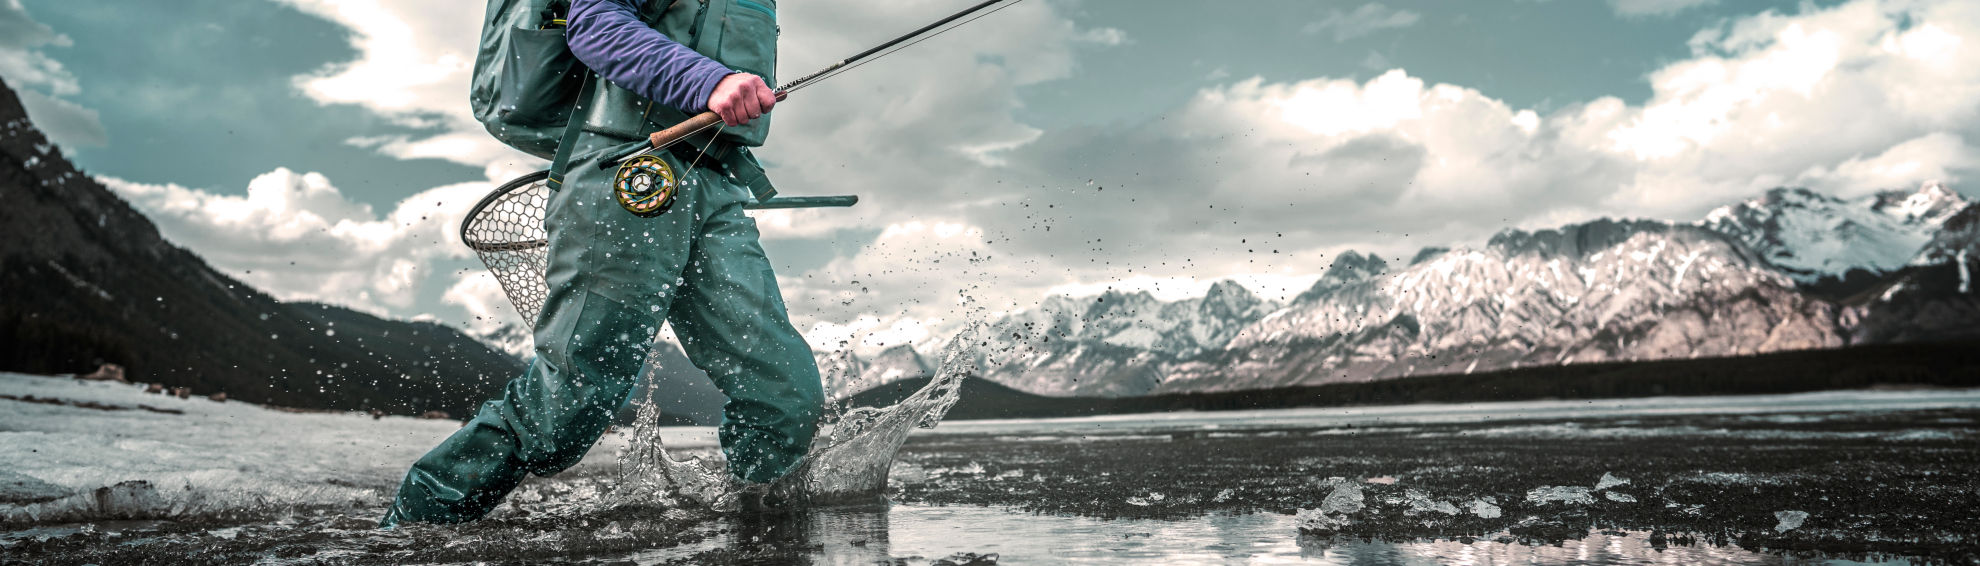 An angler in full waders and gear walking through a shallow river surrounded by snow-covered mountains